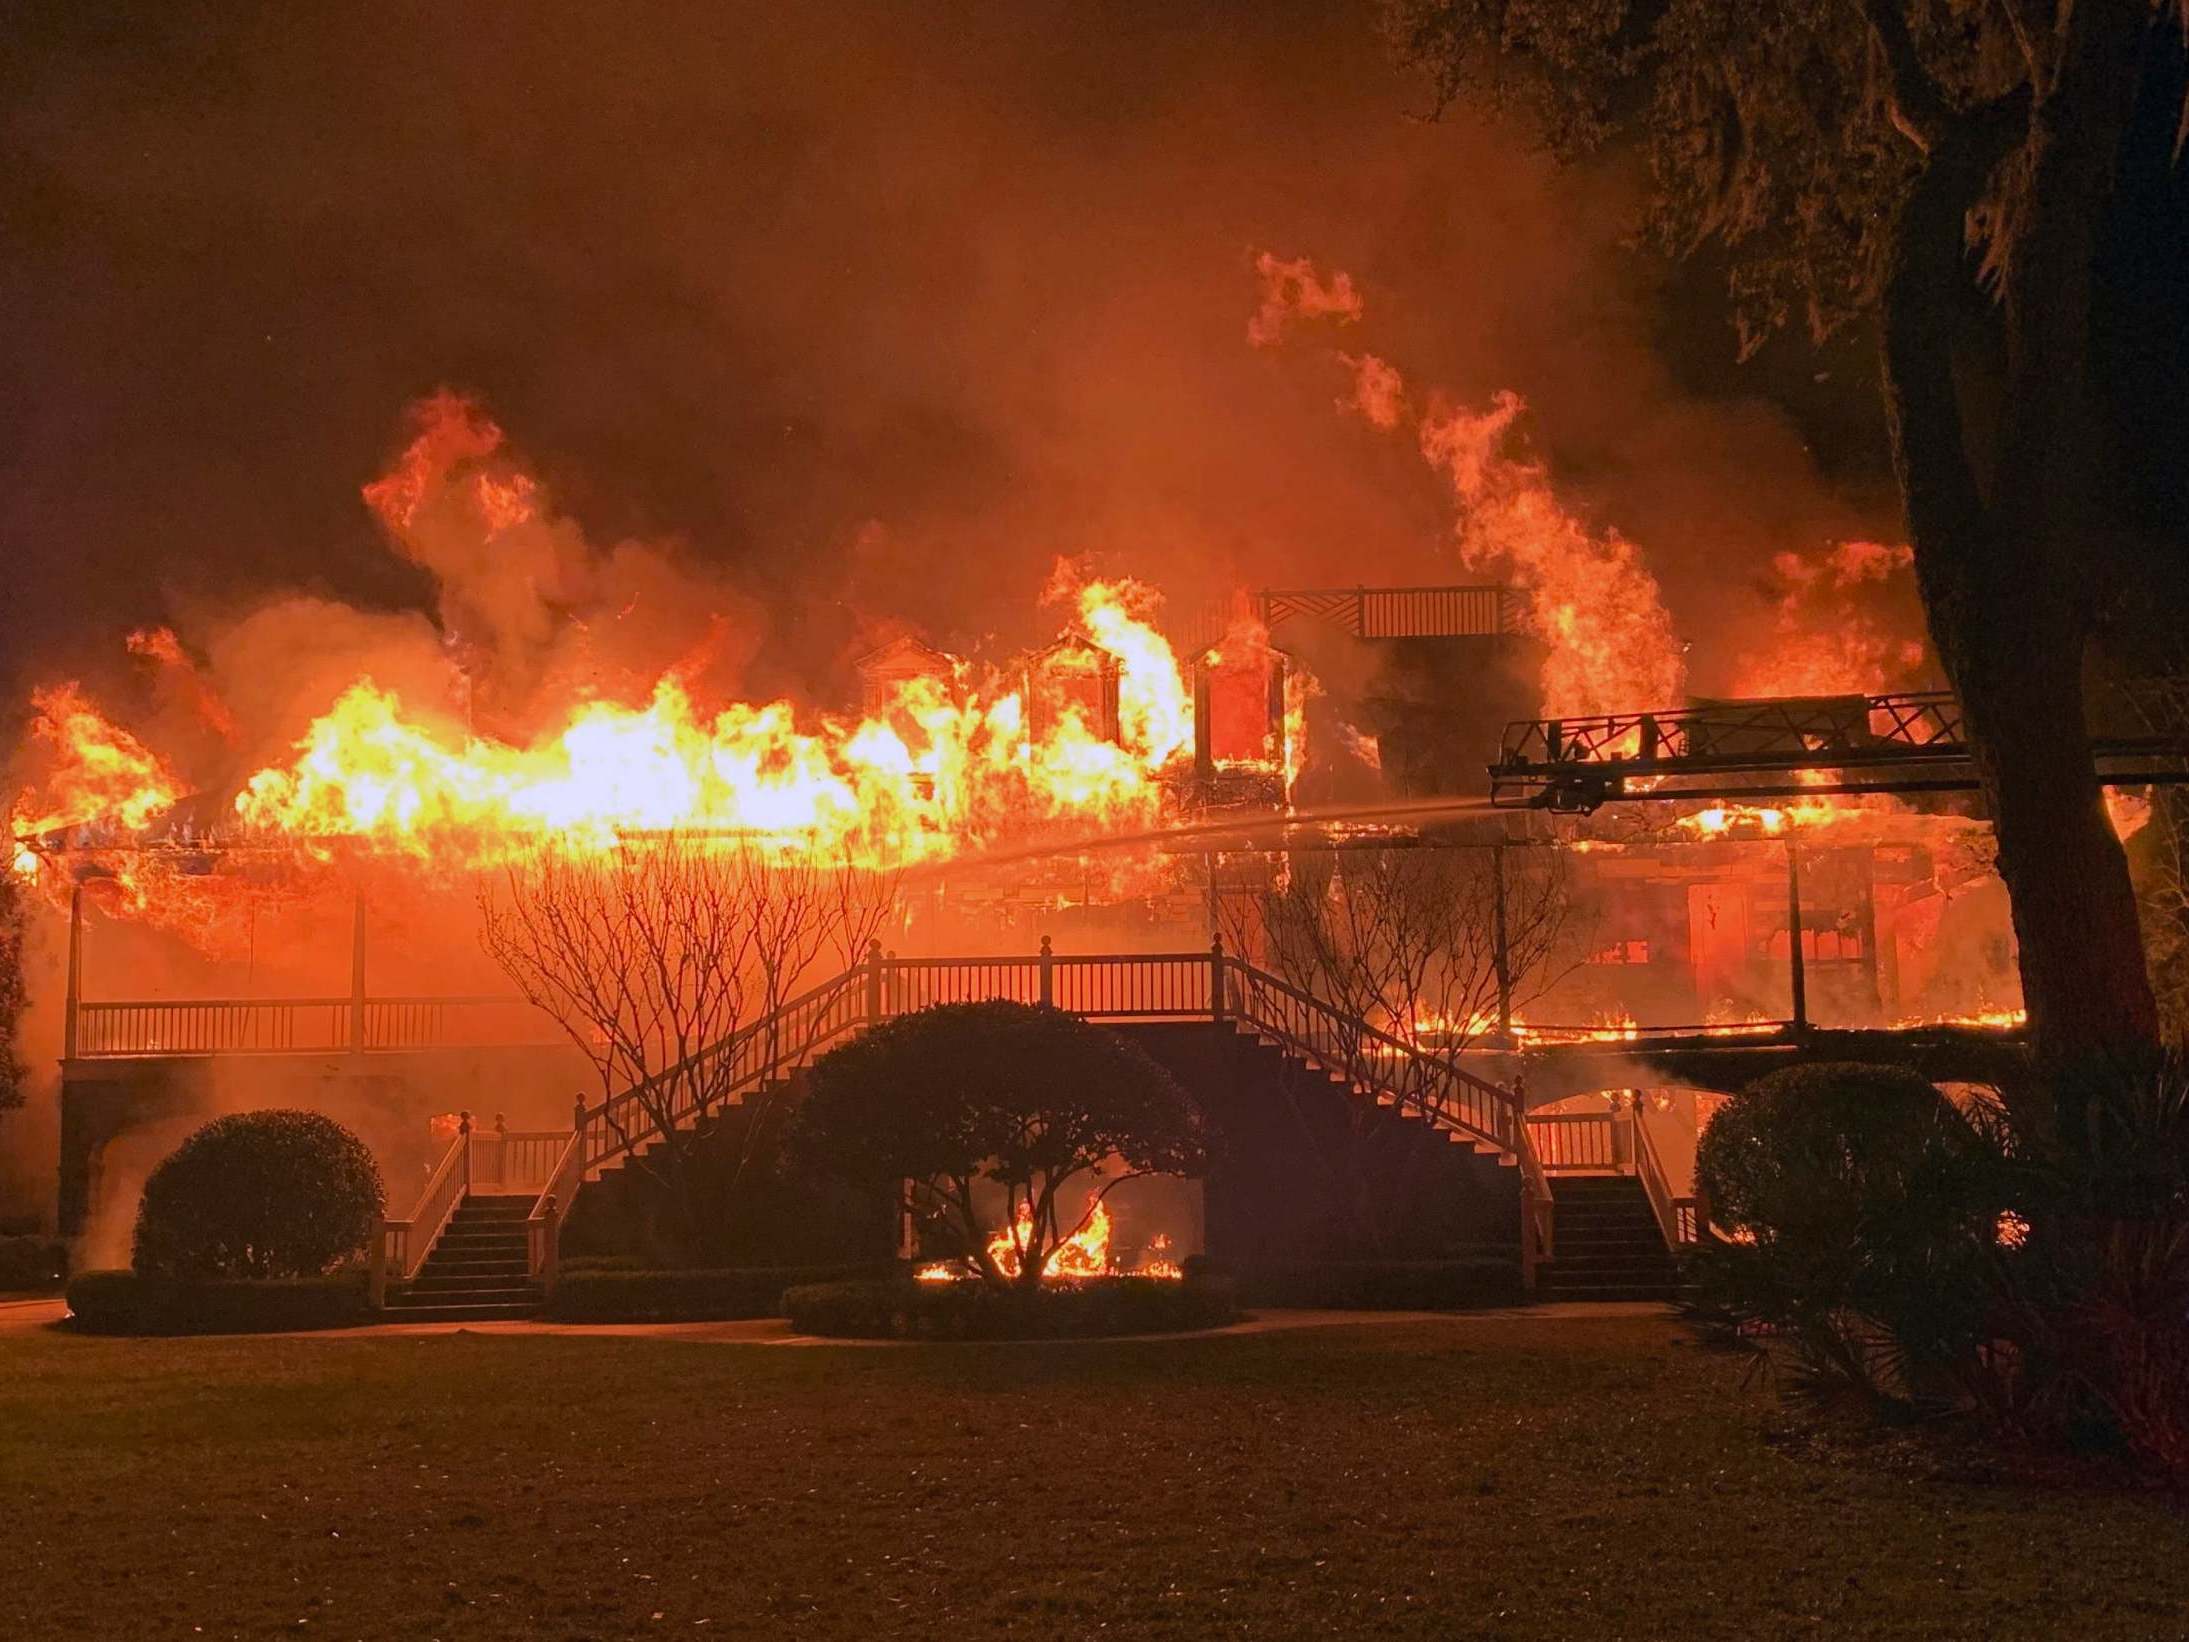 The home of Davis Love III burnt down in the early hours of Friday morning